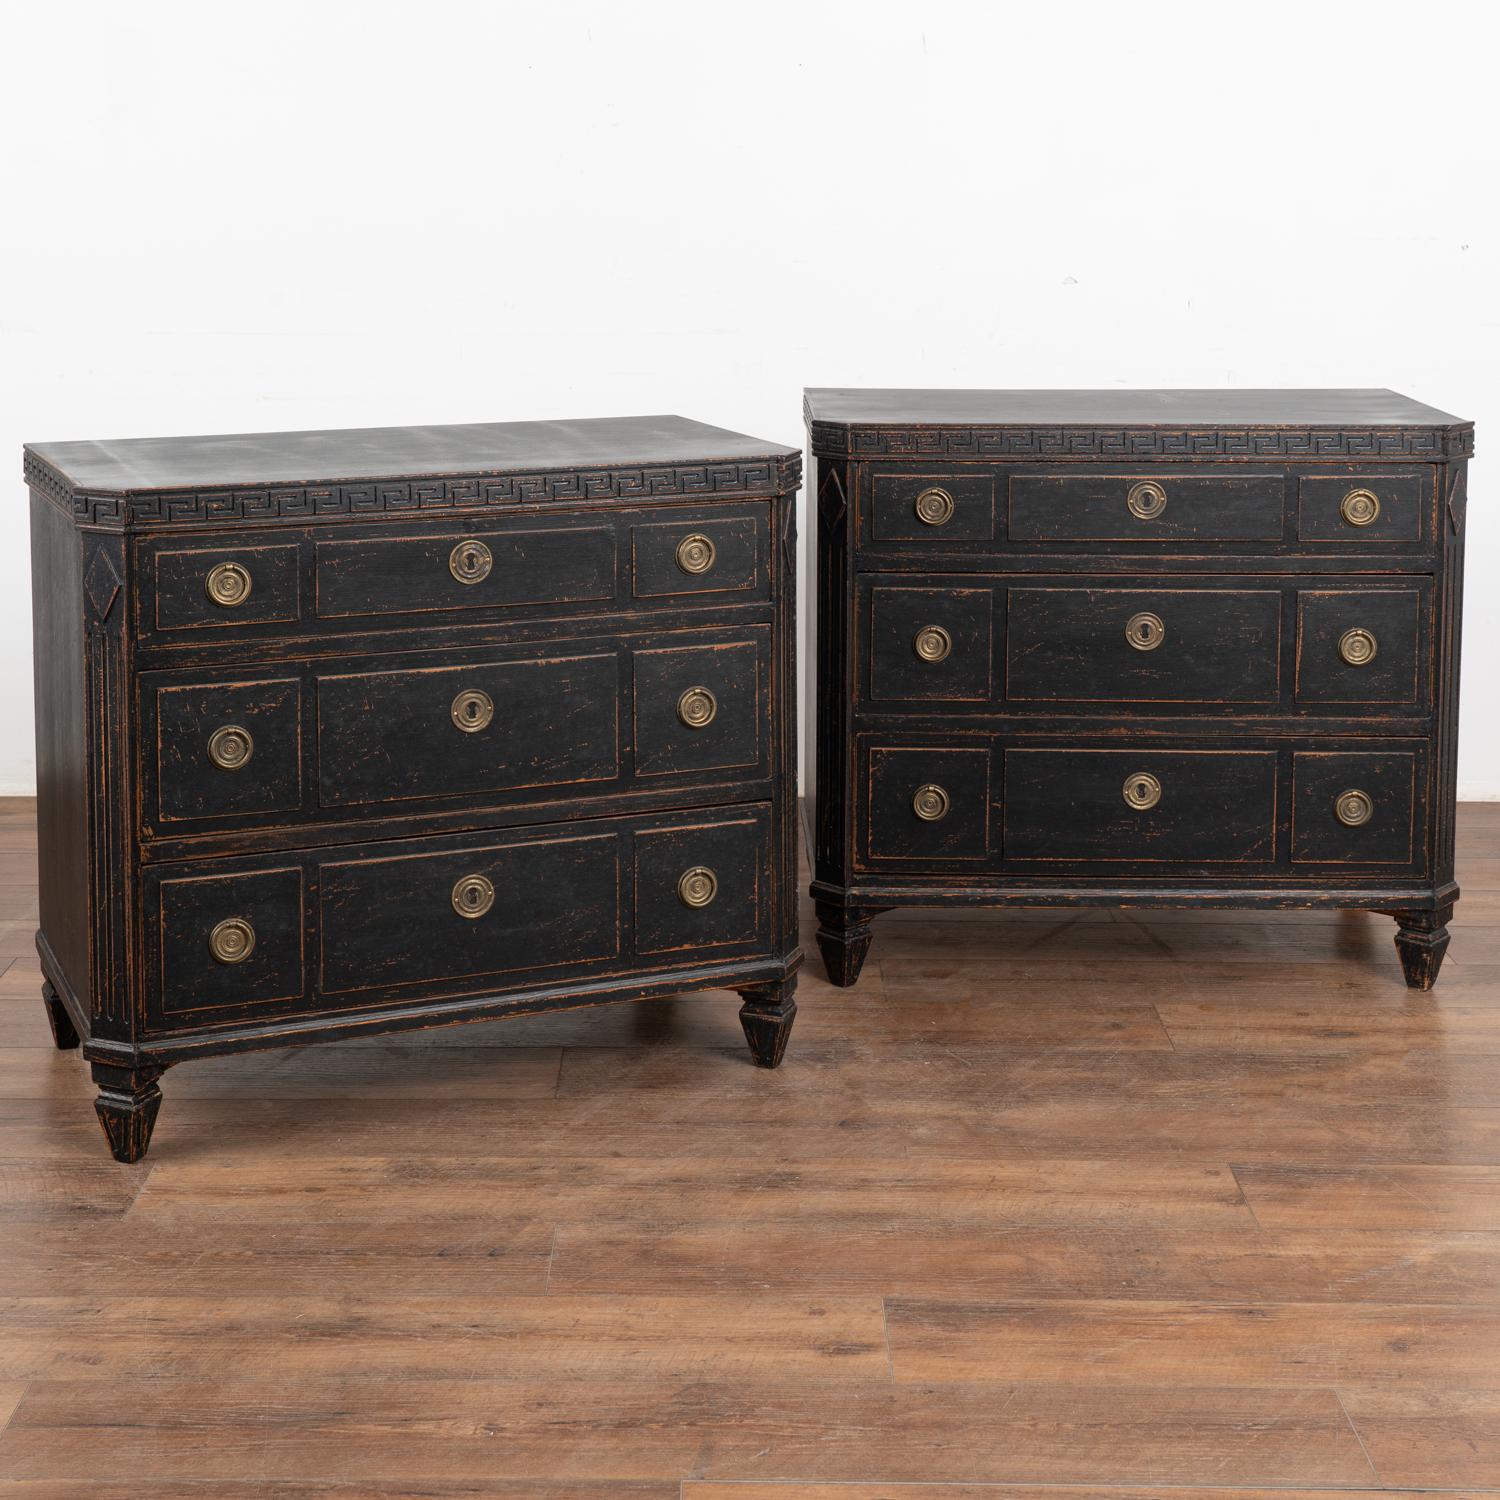 A pair of Gustavian pine chest of drawers with canted fluted side posts with upper carved diamond medallion and Greek key meander along top, all raised on four tapered fluted feet.
The newer, professionally applied layered black painted finish is